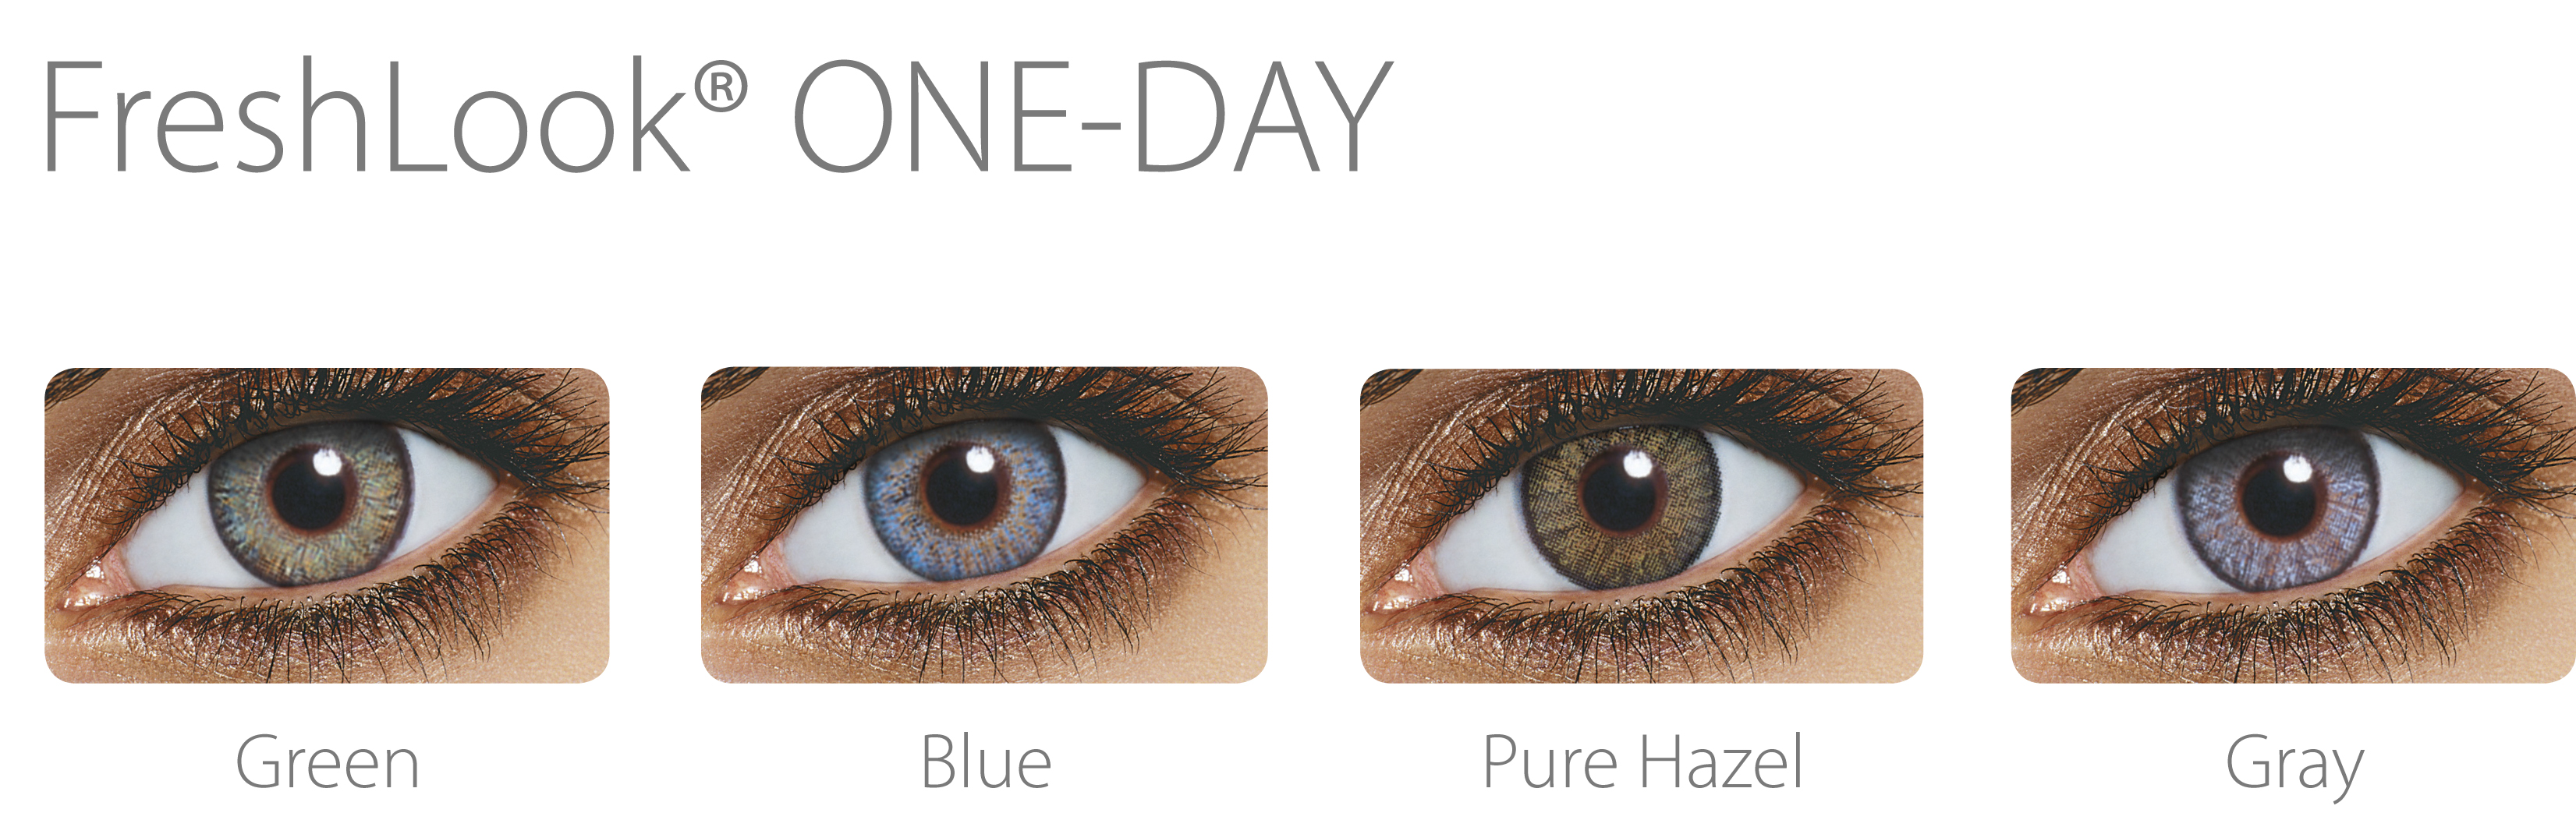 FRESHLOOK ONE DAY COLOR